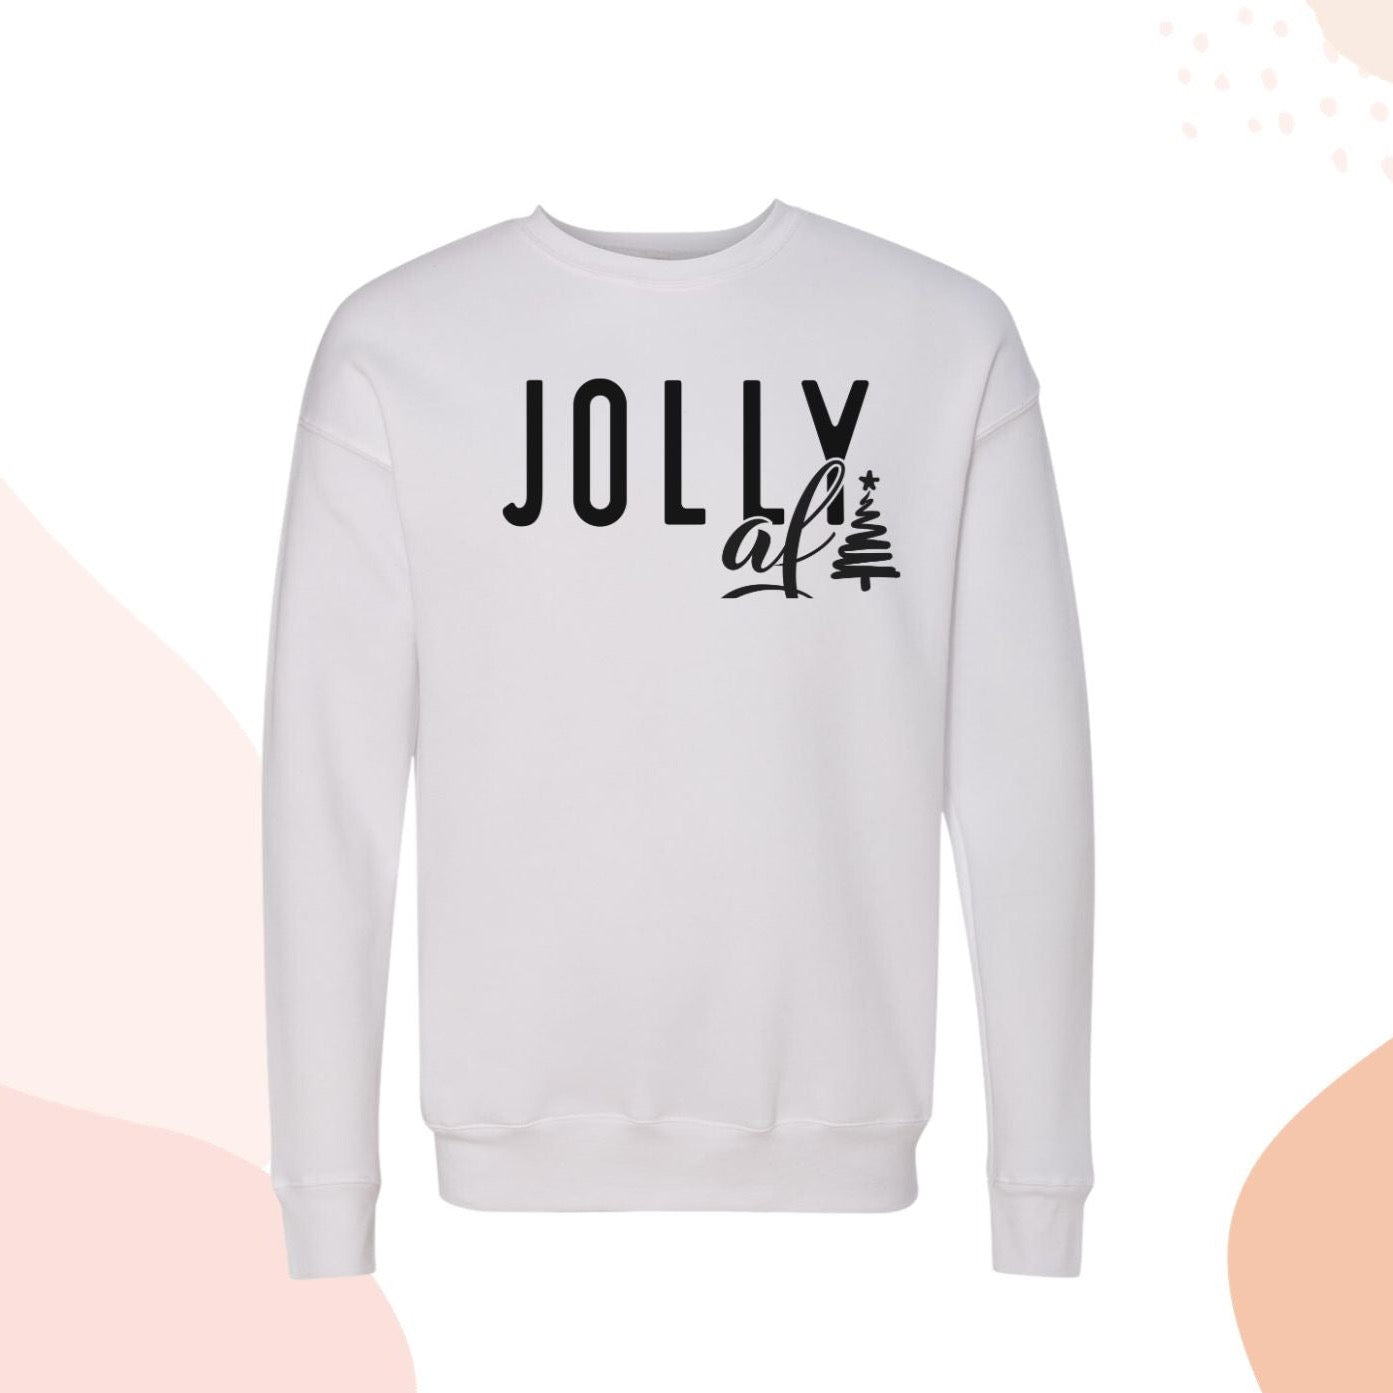 Christmas Sweatshirt Funny White Jolly af Crewneck Sweater White for Her Christmas Tree Design Humorous Jumper White Shirt for Mom Teen Girl 